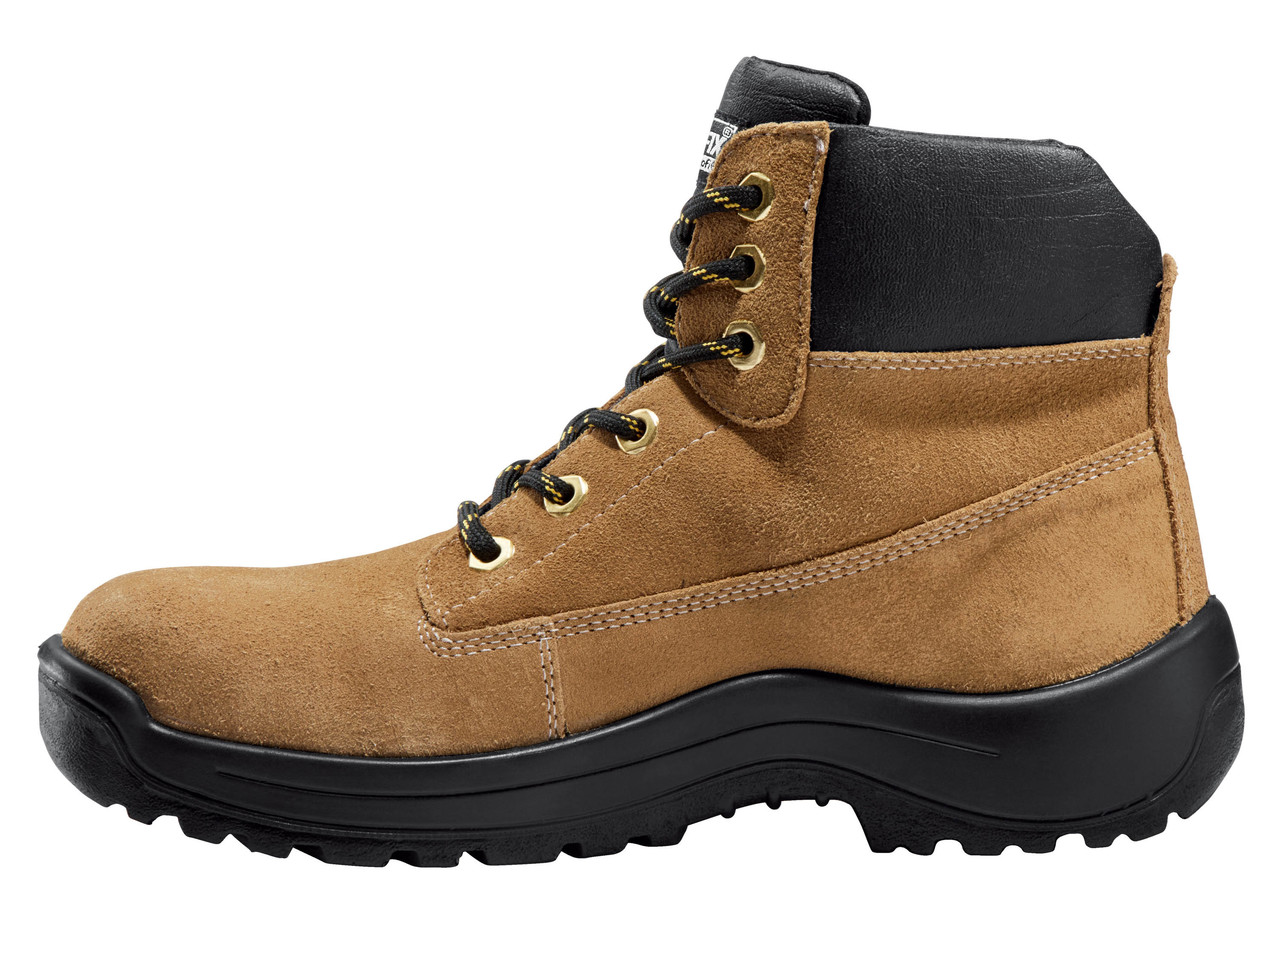 POWERFIX Men's Leather S3 Safety Boots